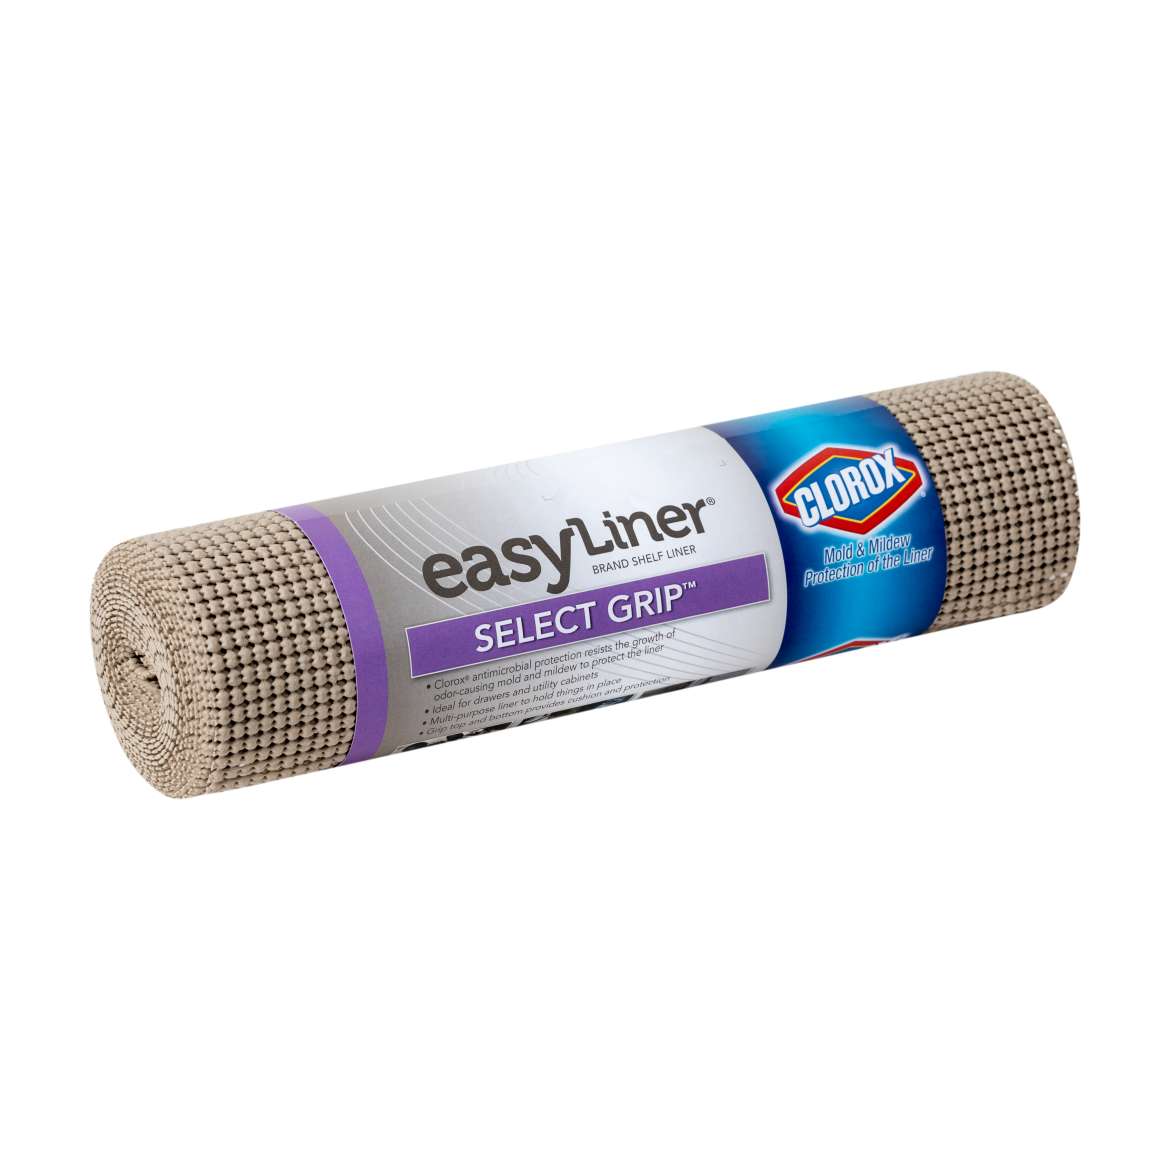 Select Grip™ EasyLiner® with Clorox®